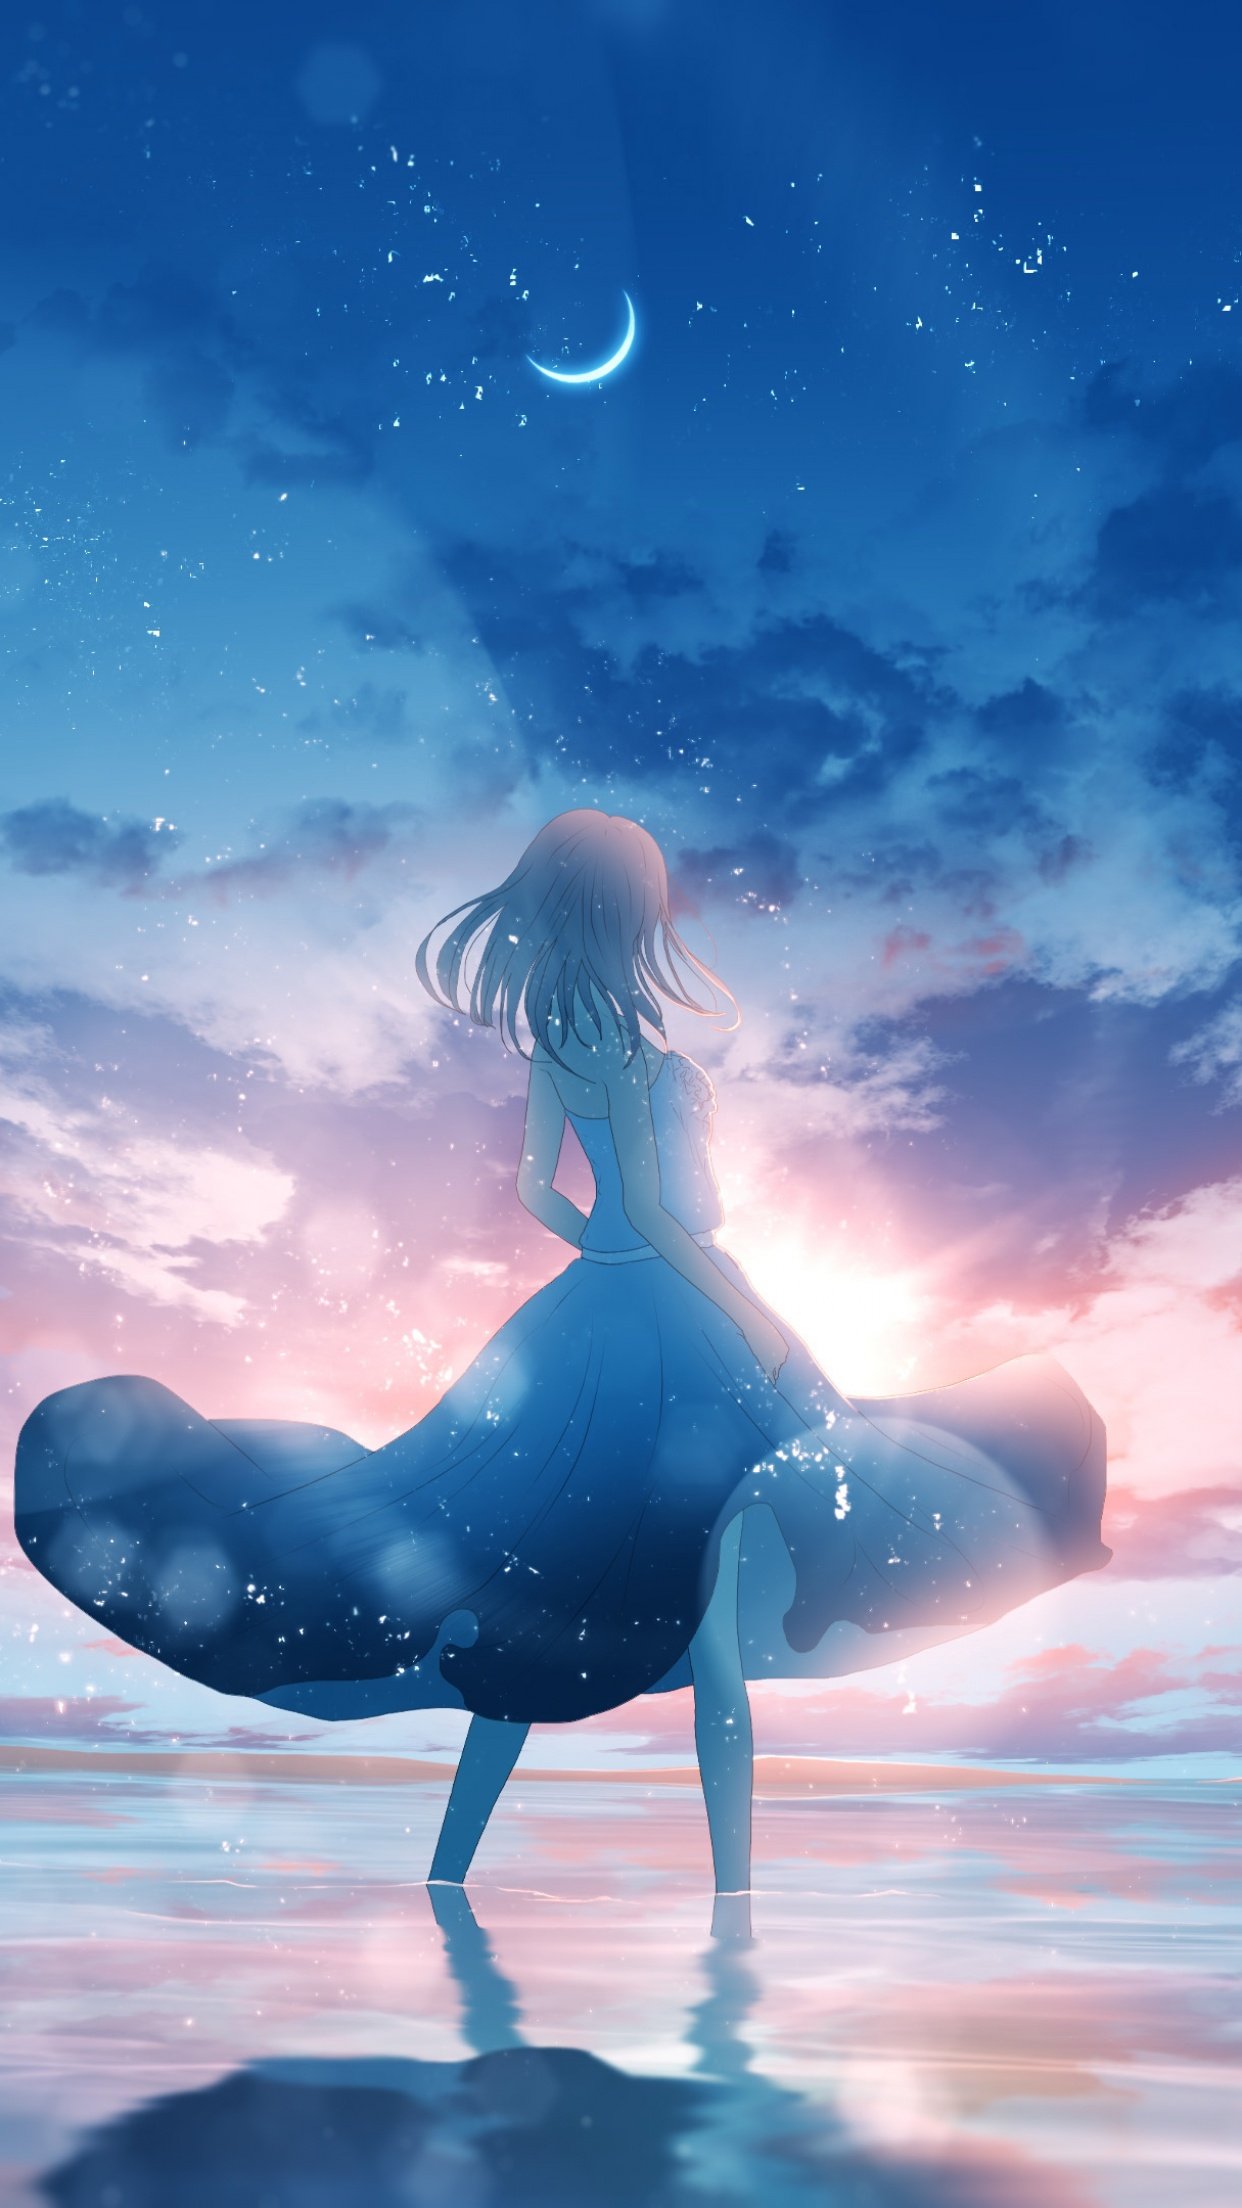 Anime girl standing alone Wallpapers Download | MobCup